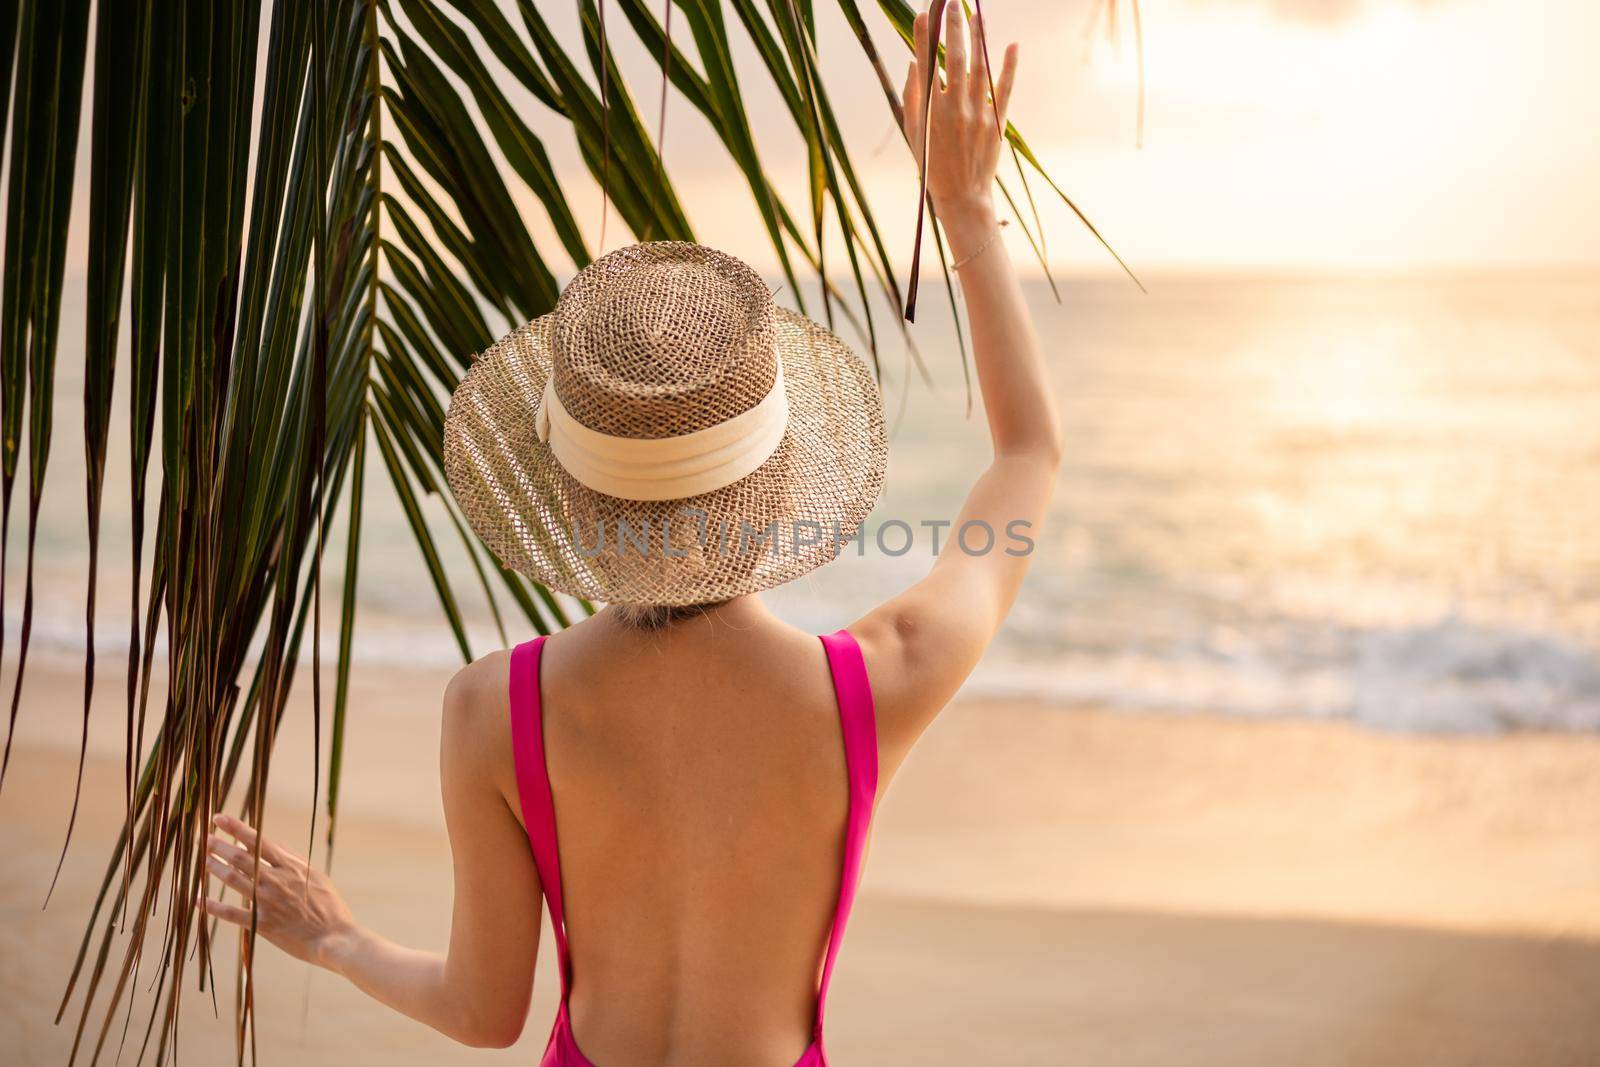 Woman wearing pink one piece swimsuit and straw hat enjoy romantic sunset moment under the coconut trees on tropical beach.